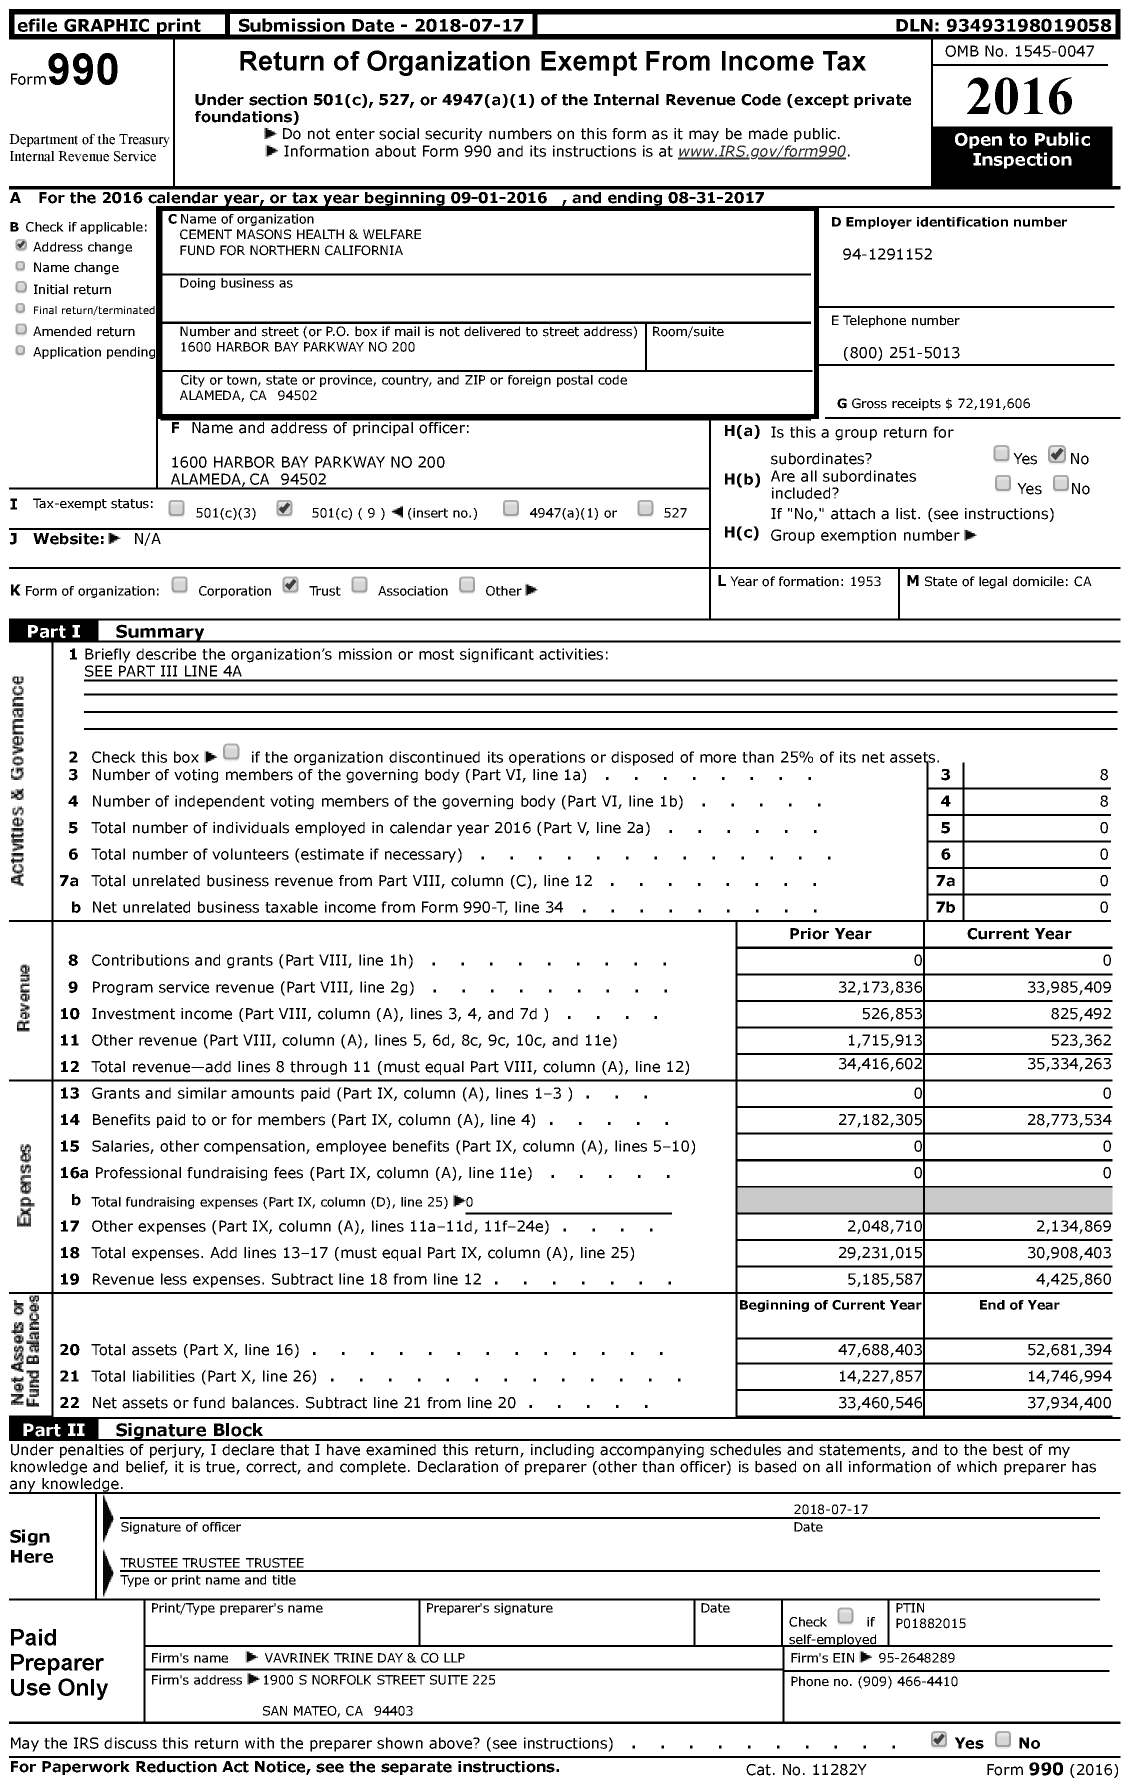 Image of first page of 2016 Form 990 for Cement Masons Health and Welfare Fund for Northern California